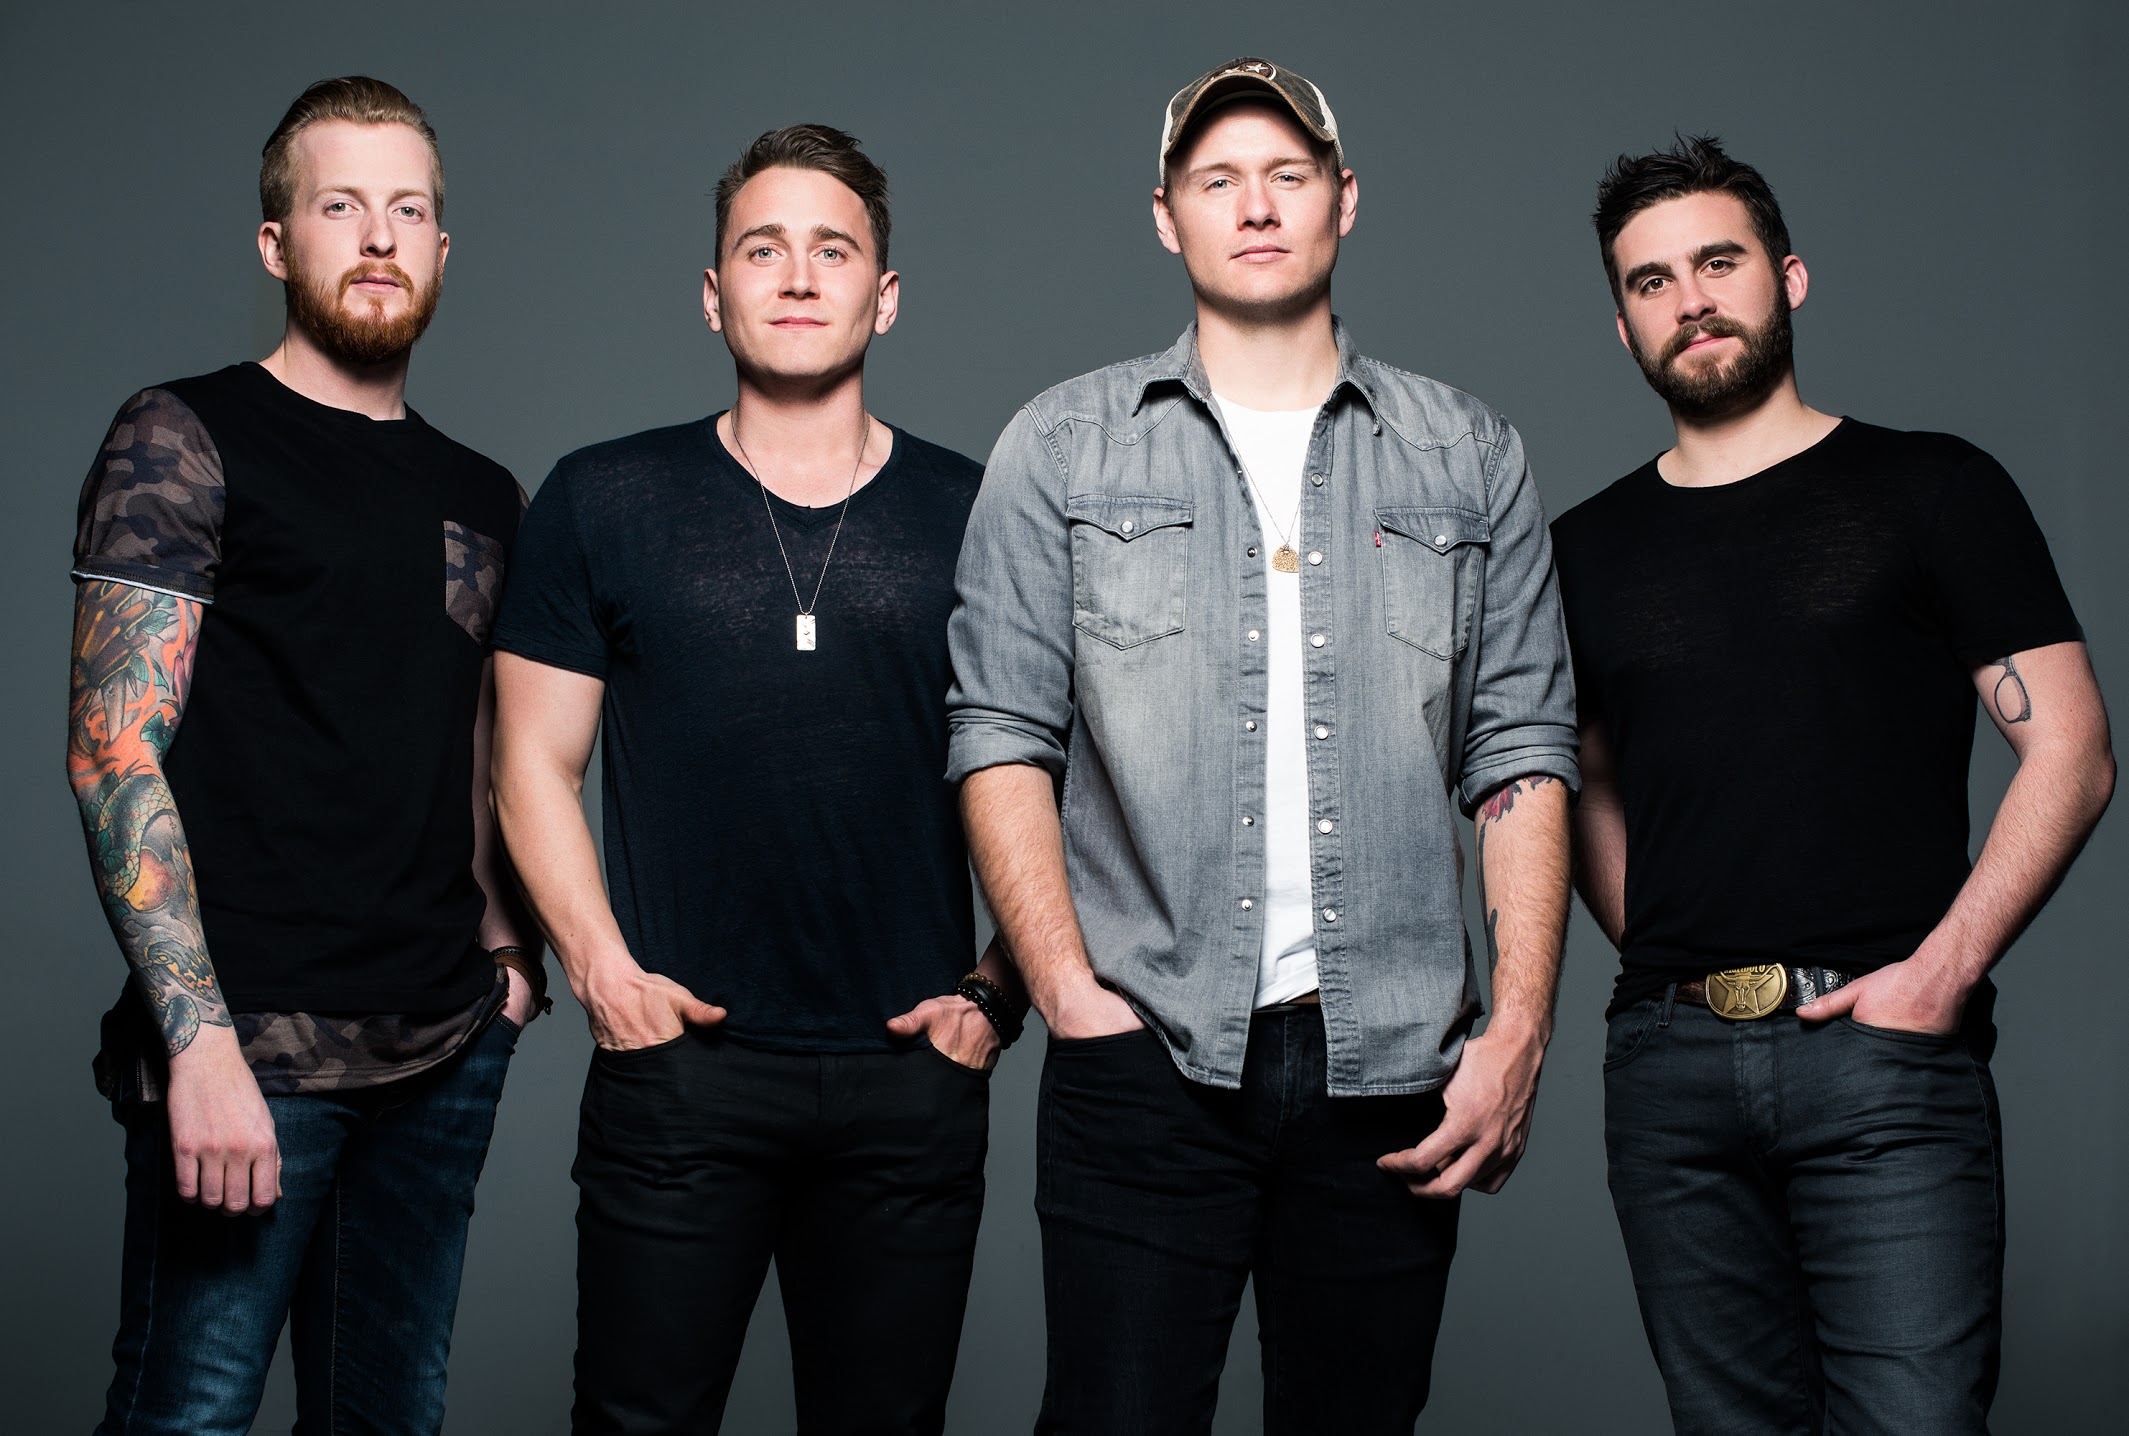 James Barker Band Reveal Which Songs Give Them “Chills” – Exclusive